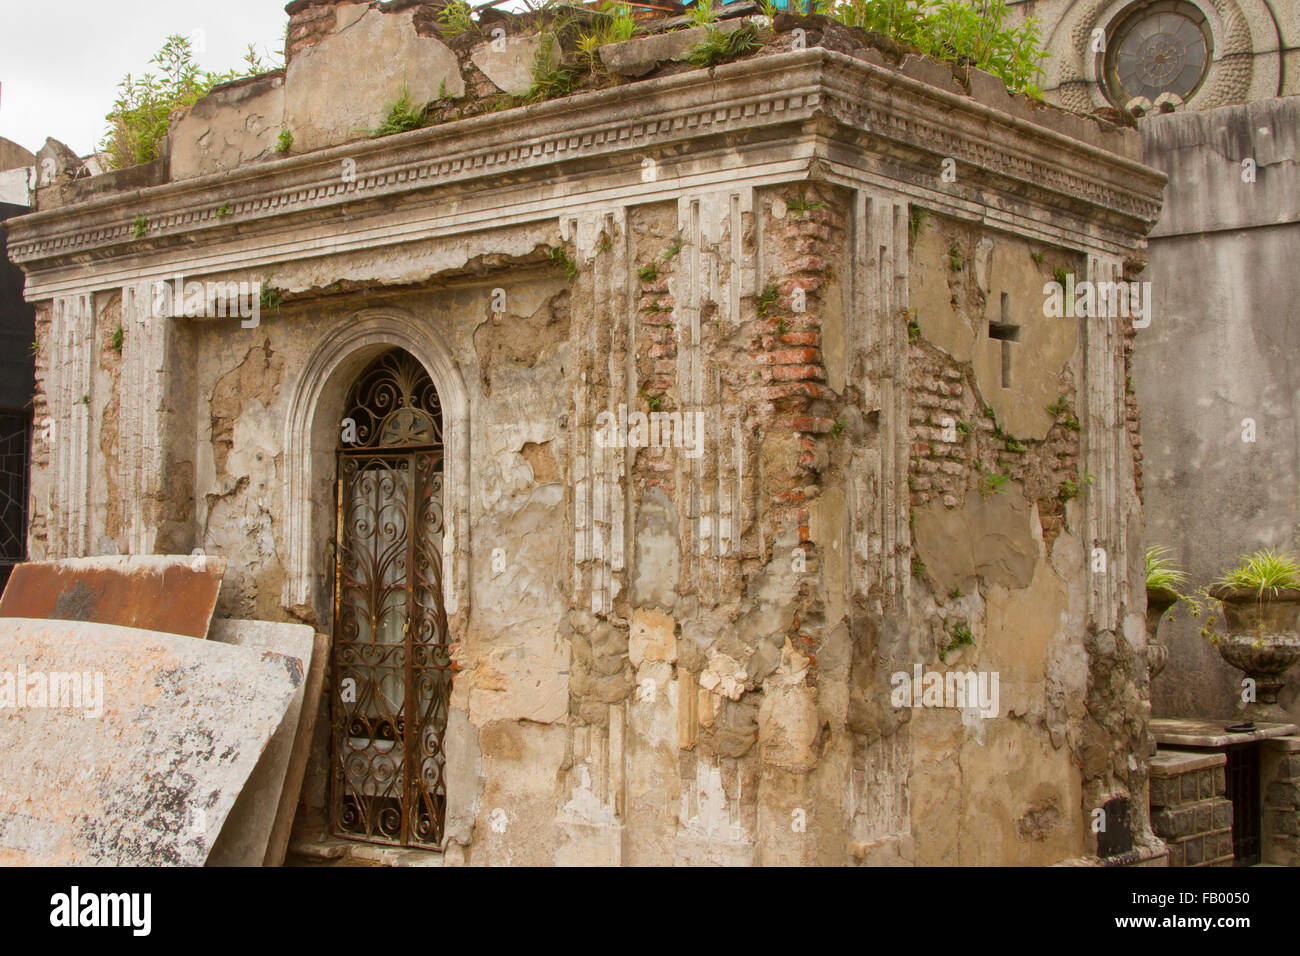 Crypt in disrepair and neglect in Recoleta Cemetery, Buenos Aires, Argentina. Stock Photo